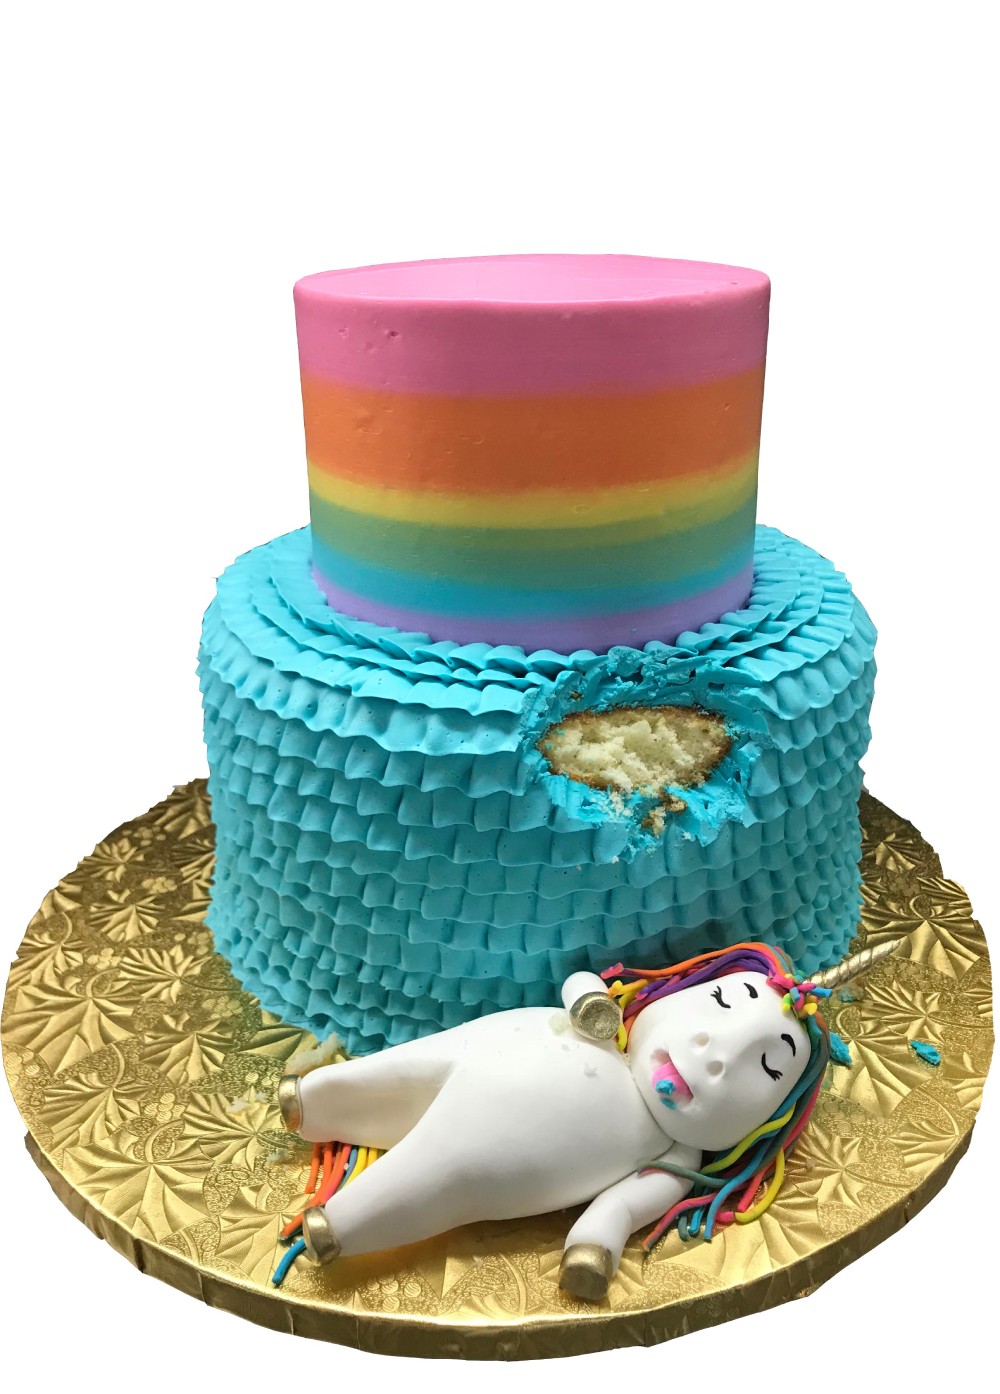 Two tiered rainbow ombre and ruffled cakes with gumpaste sleepy unicorn figure